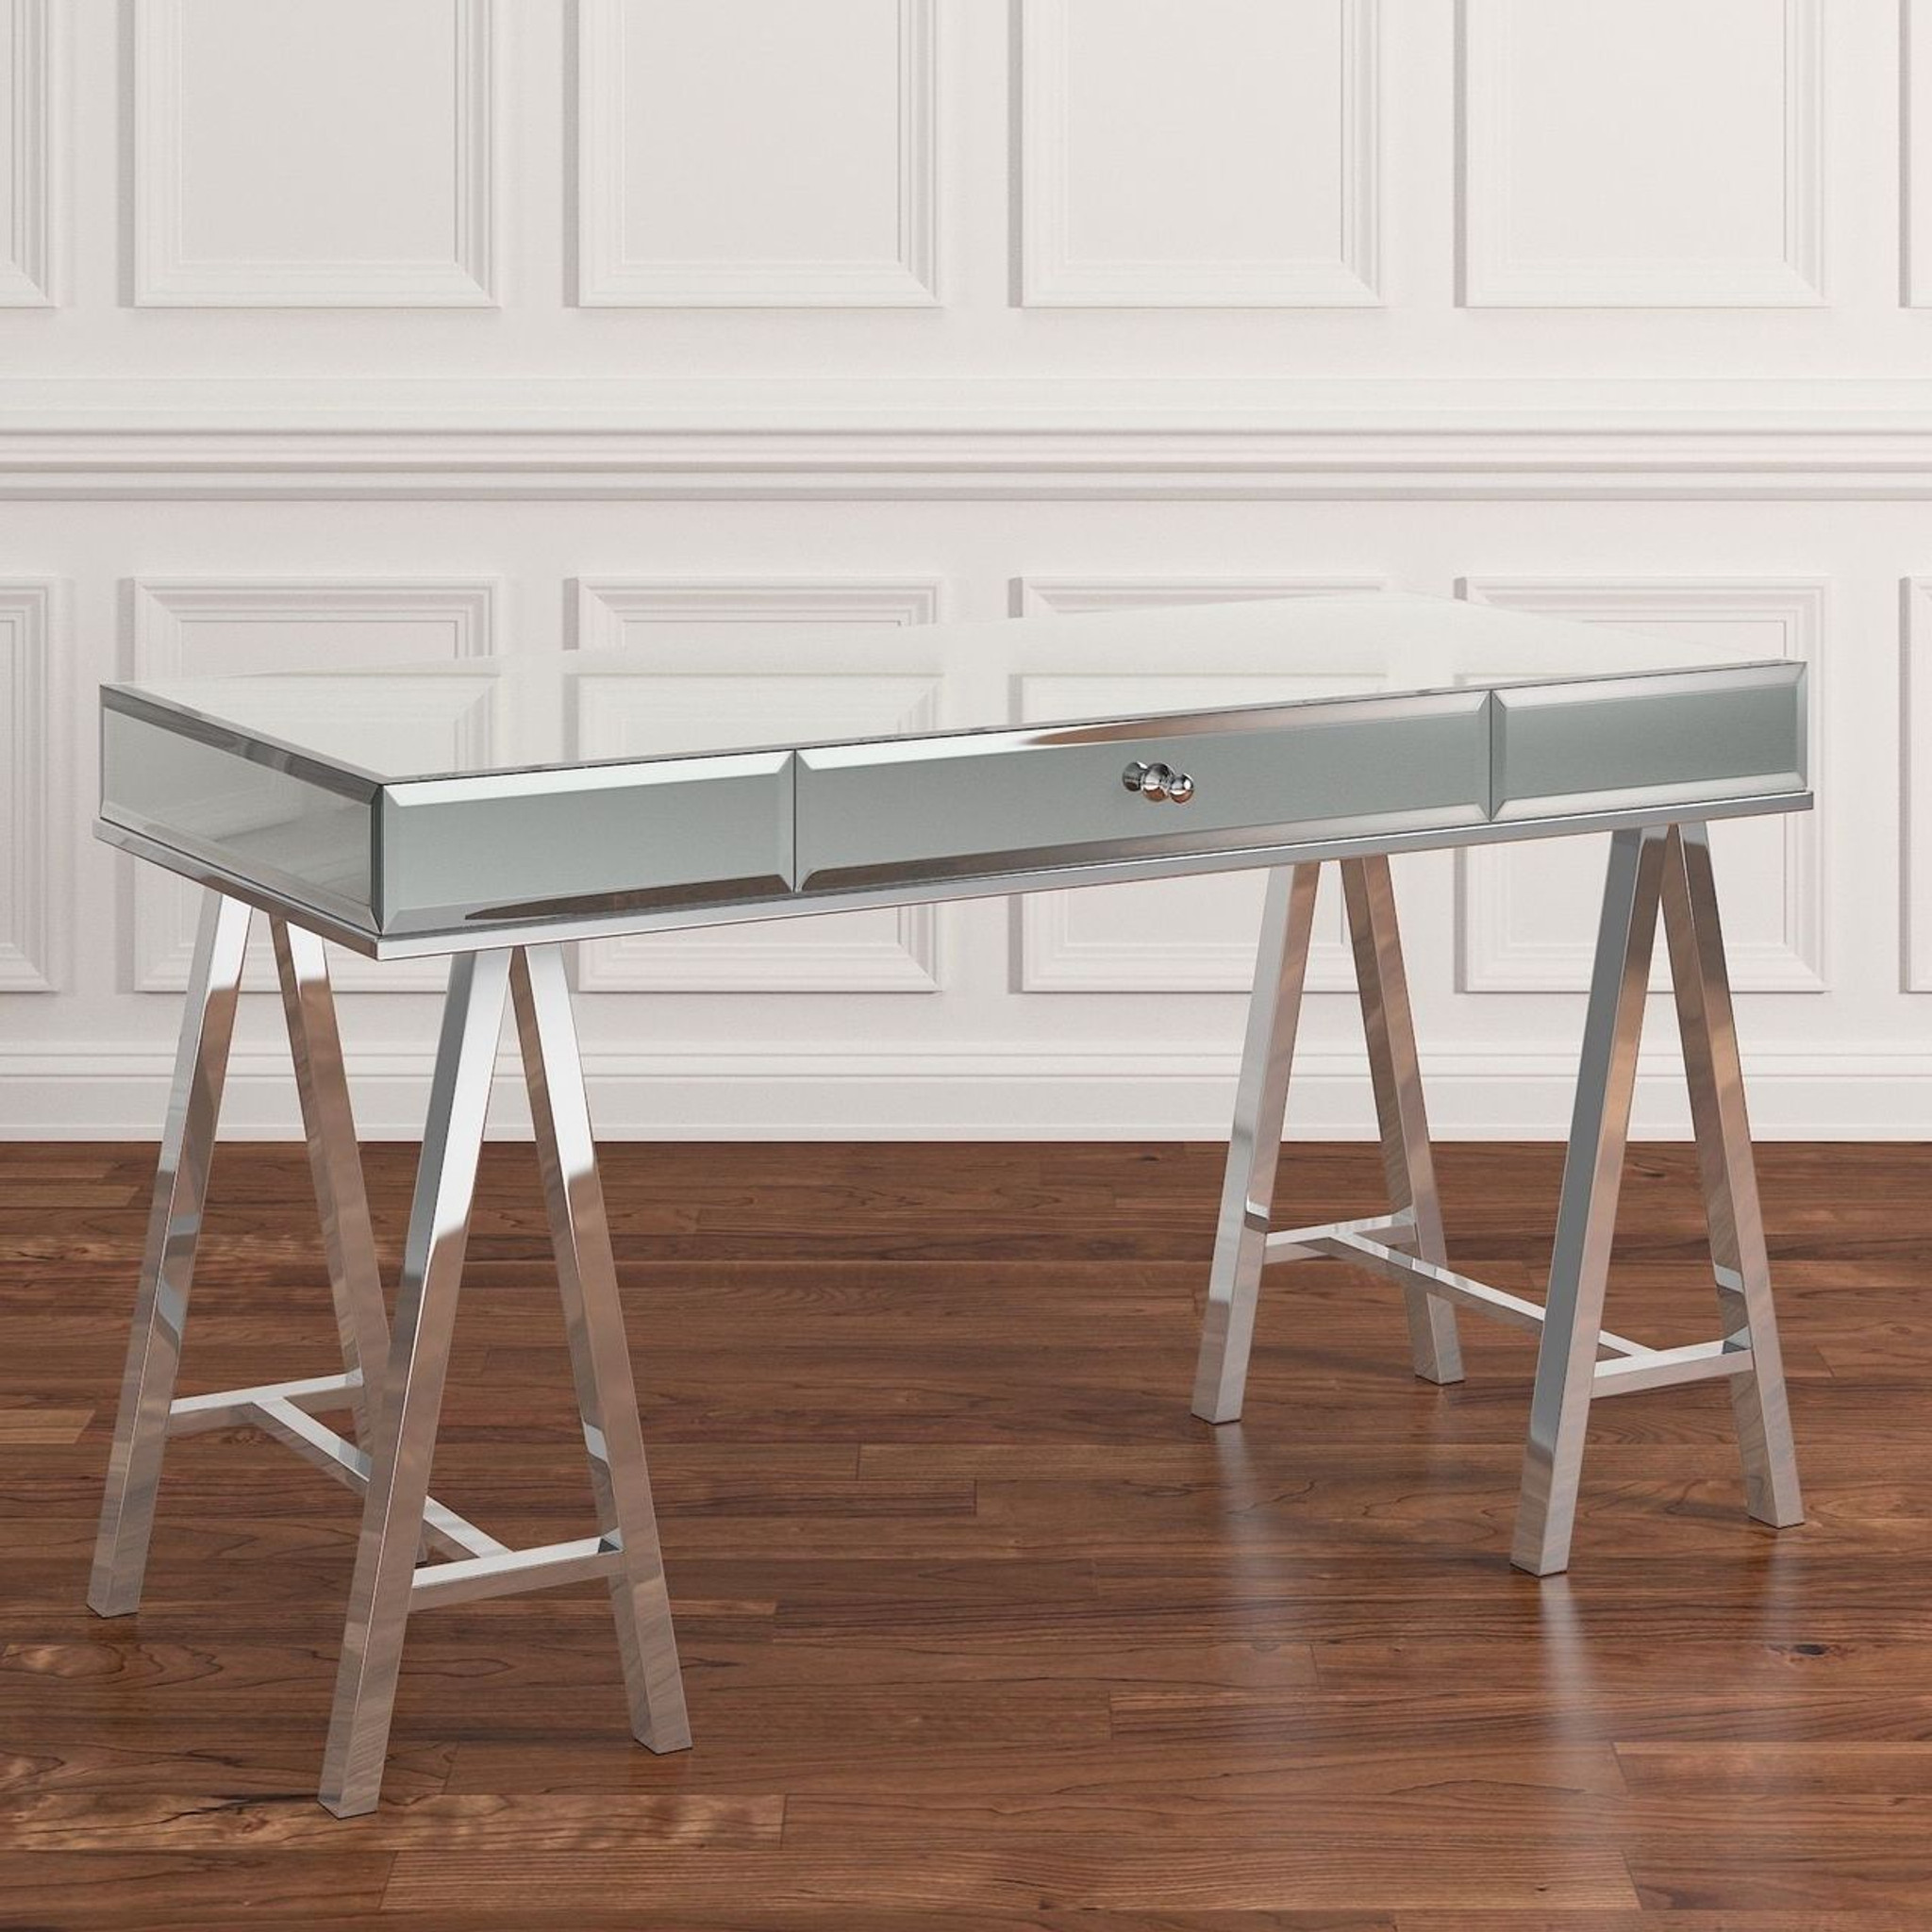 Mirrored Desk With Sawhorse Legs Clear Home Design